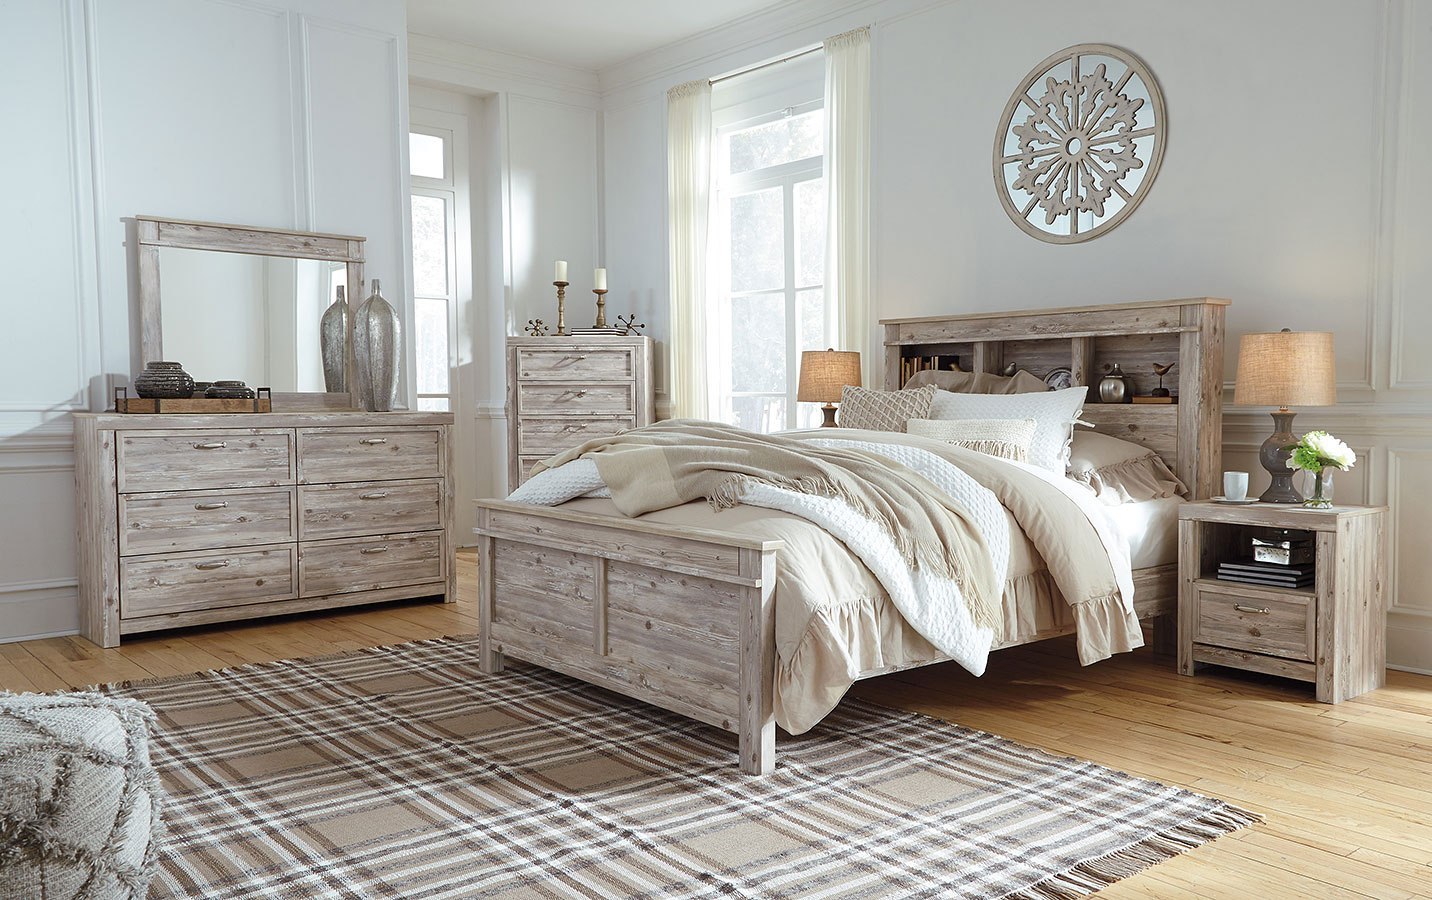 WILLABRY WEATHERED BEIGE BOOKCASE BEDROOM SET BENCHCRAFT DESIGN BY ...